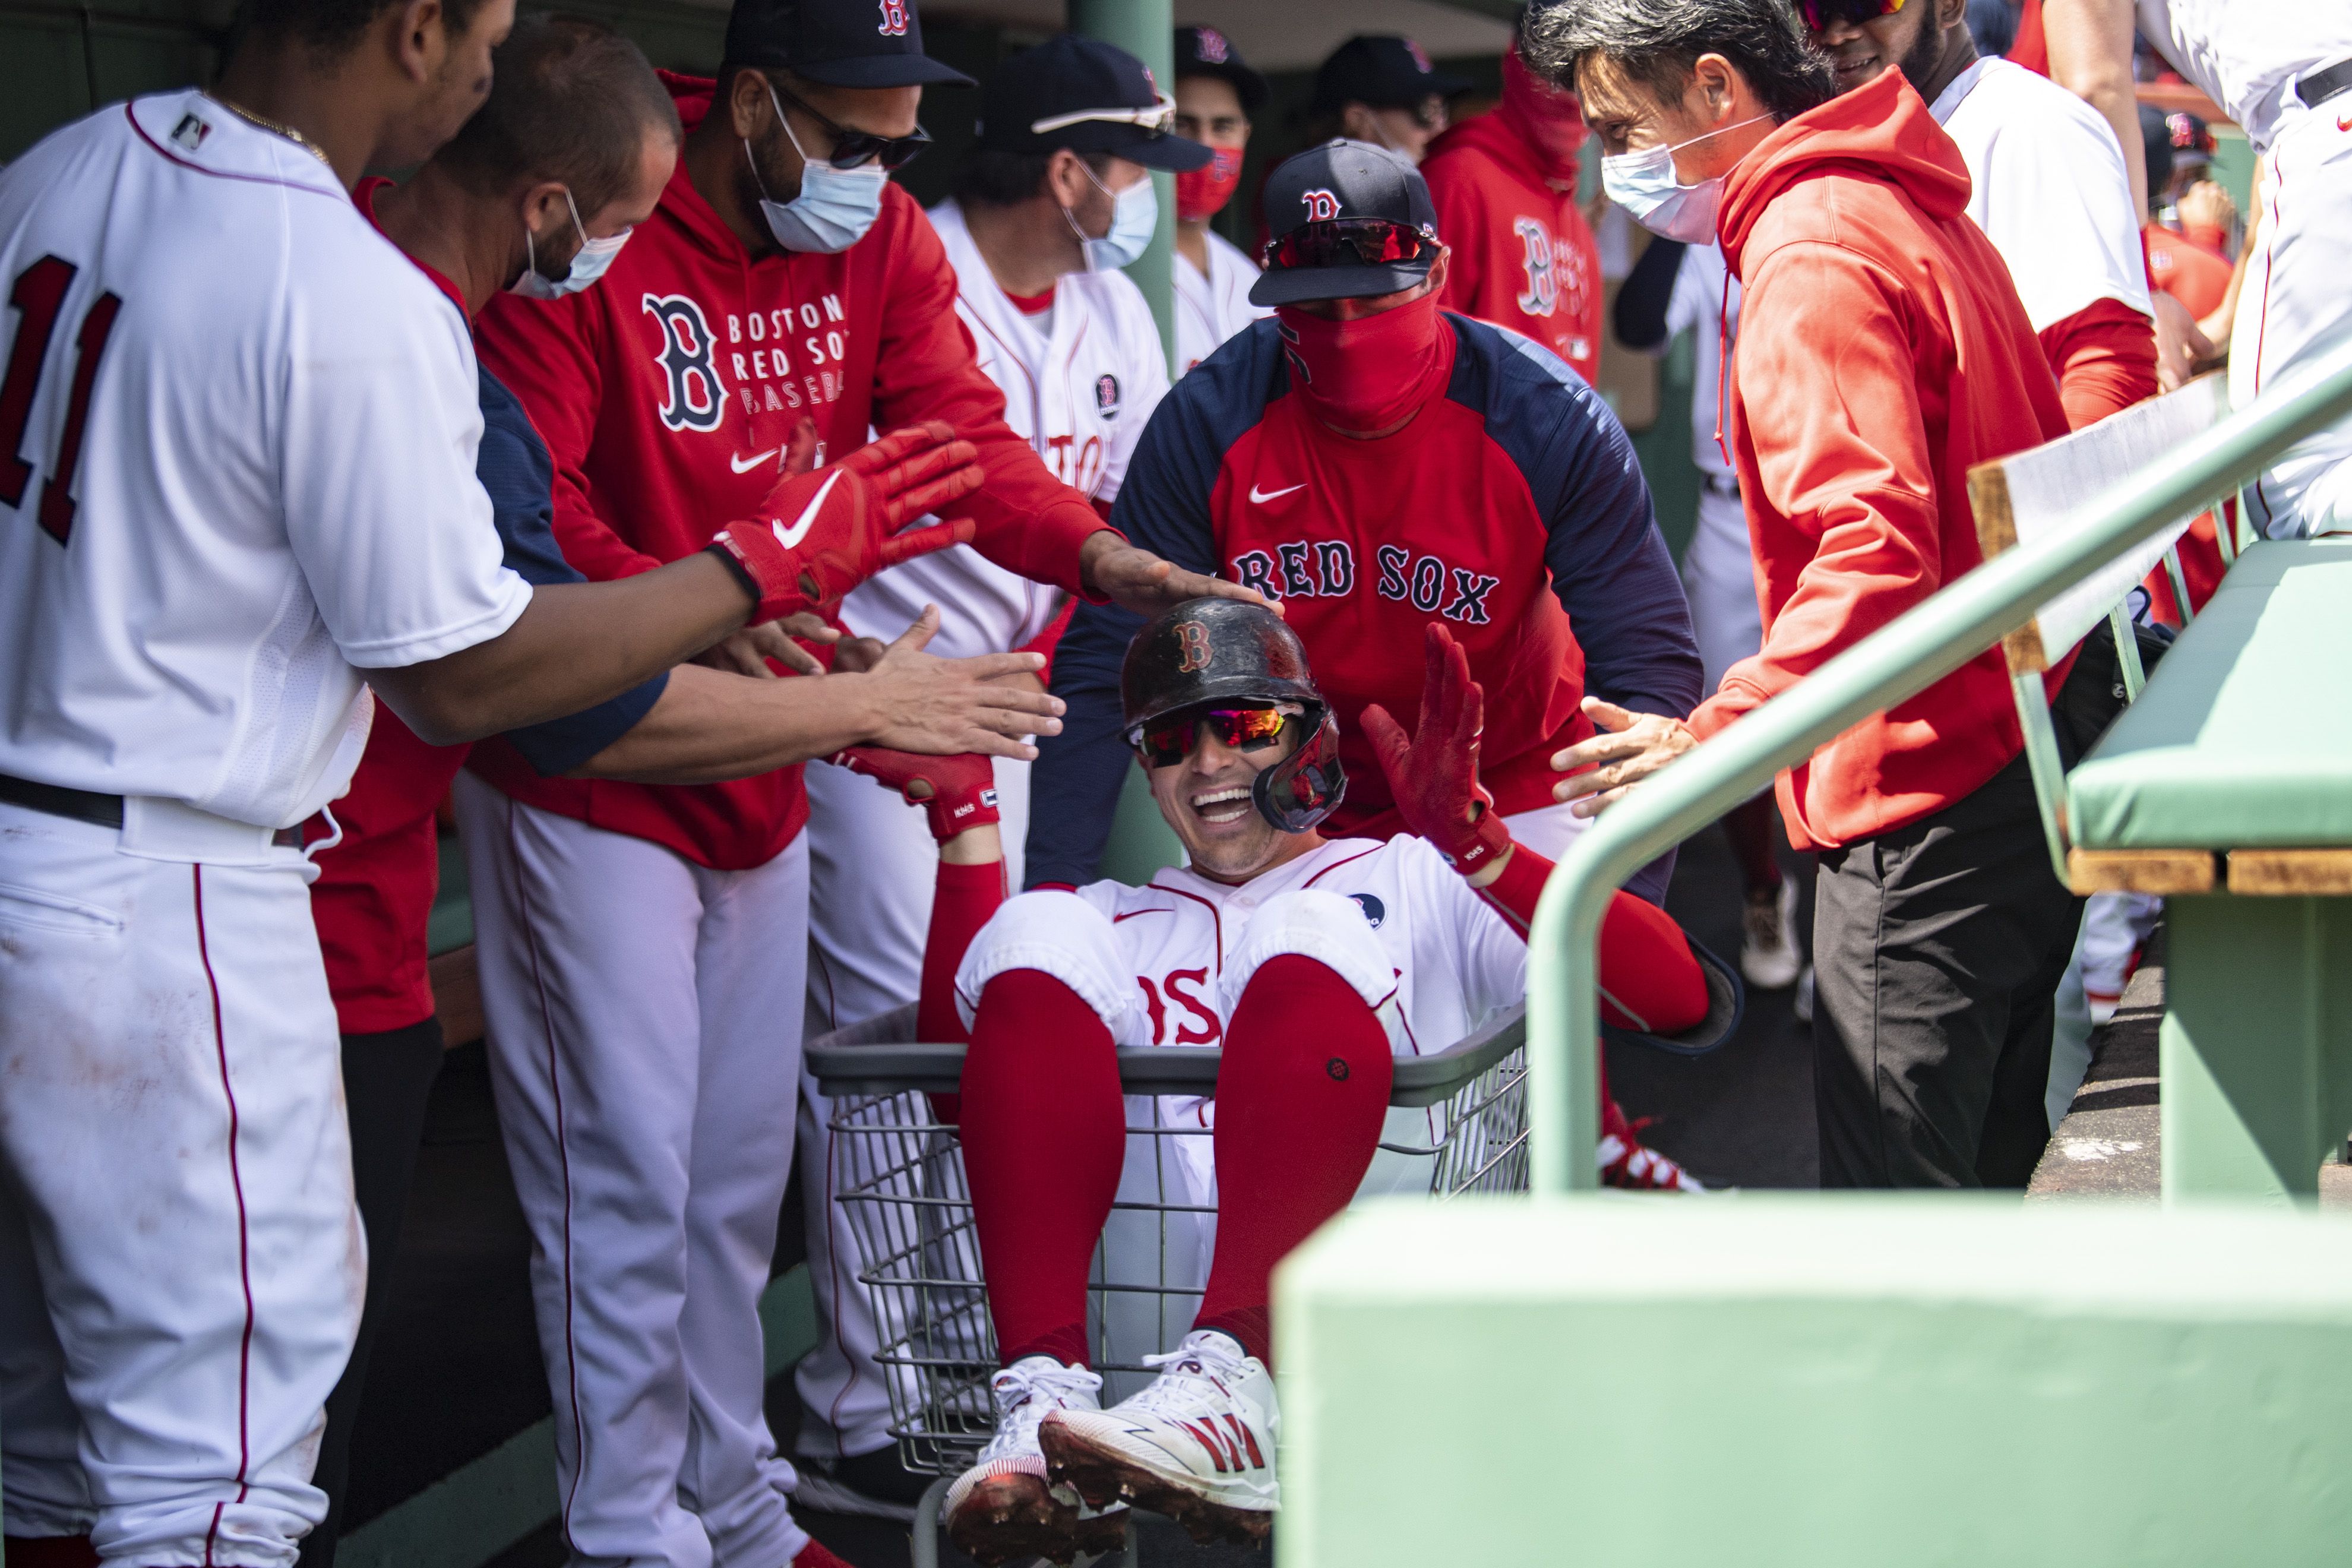 Red Sox in the dugout